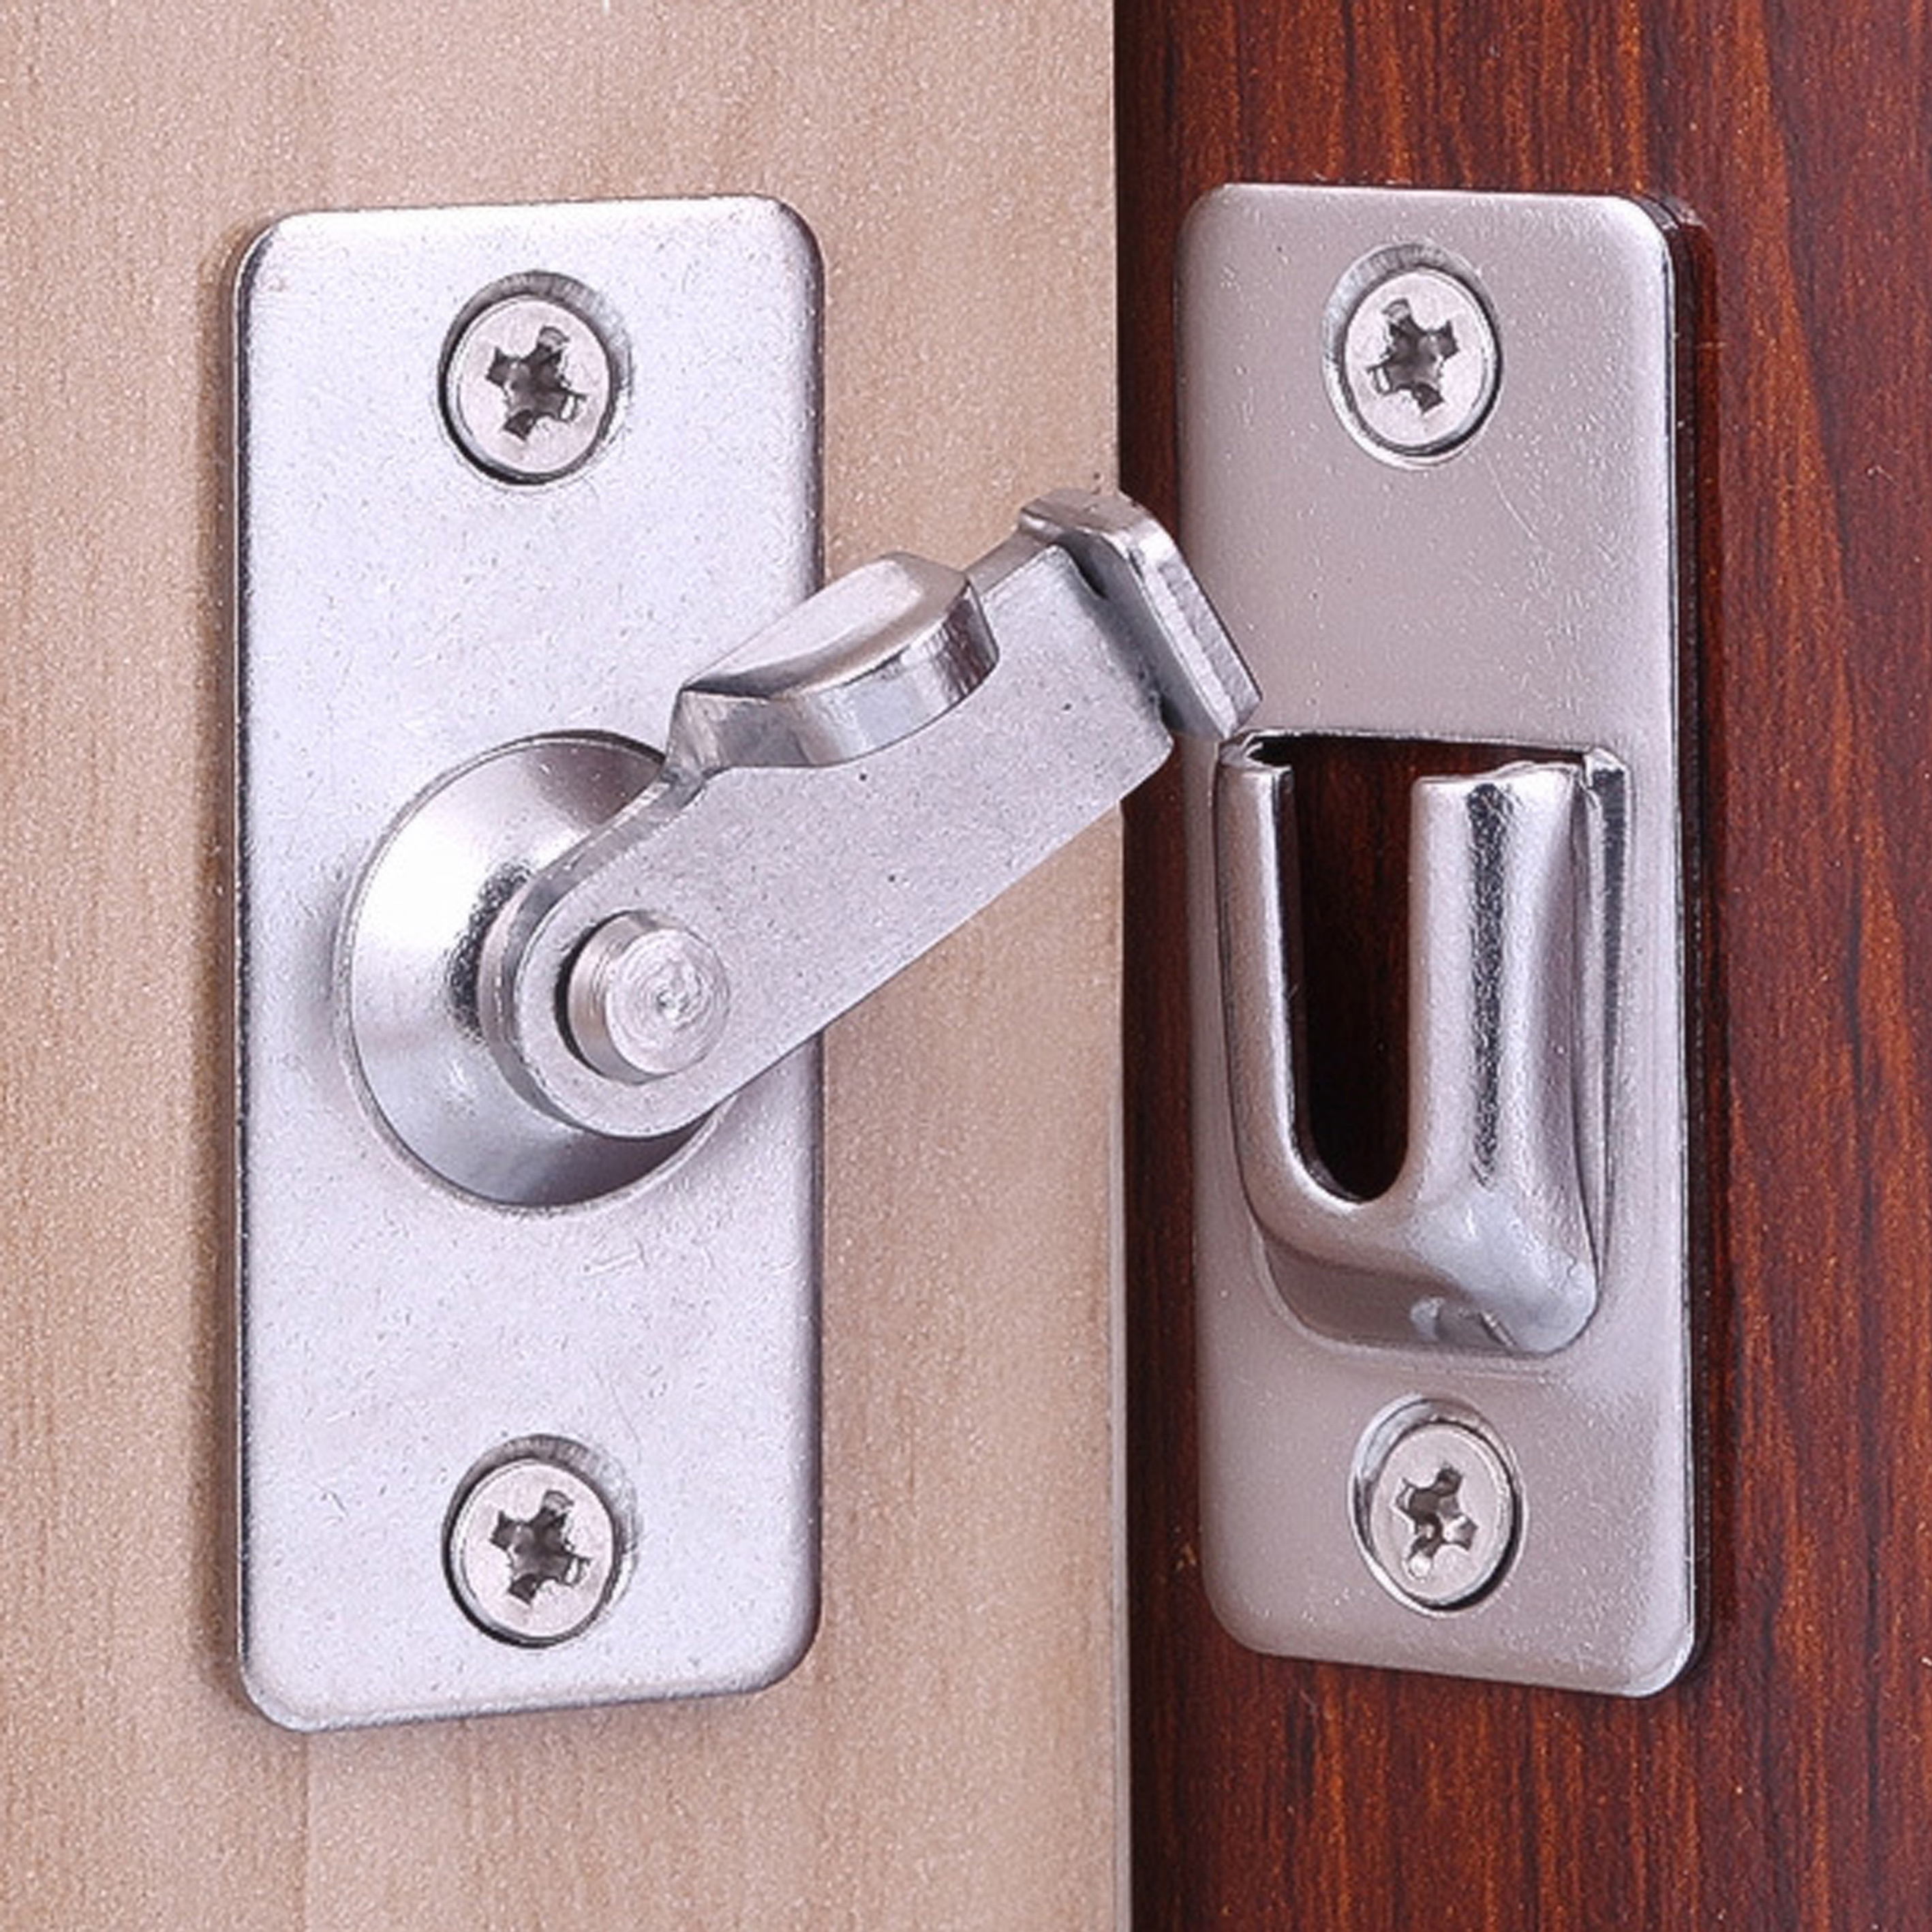 

Secure Your Home With This Heavy-duty 304 Stainless Steel Door Lock Latch!